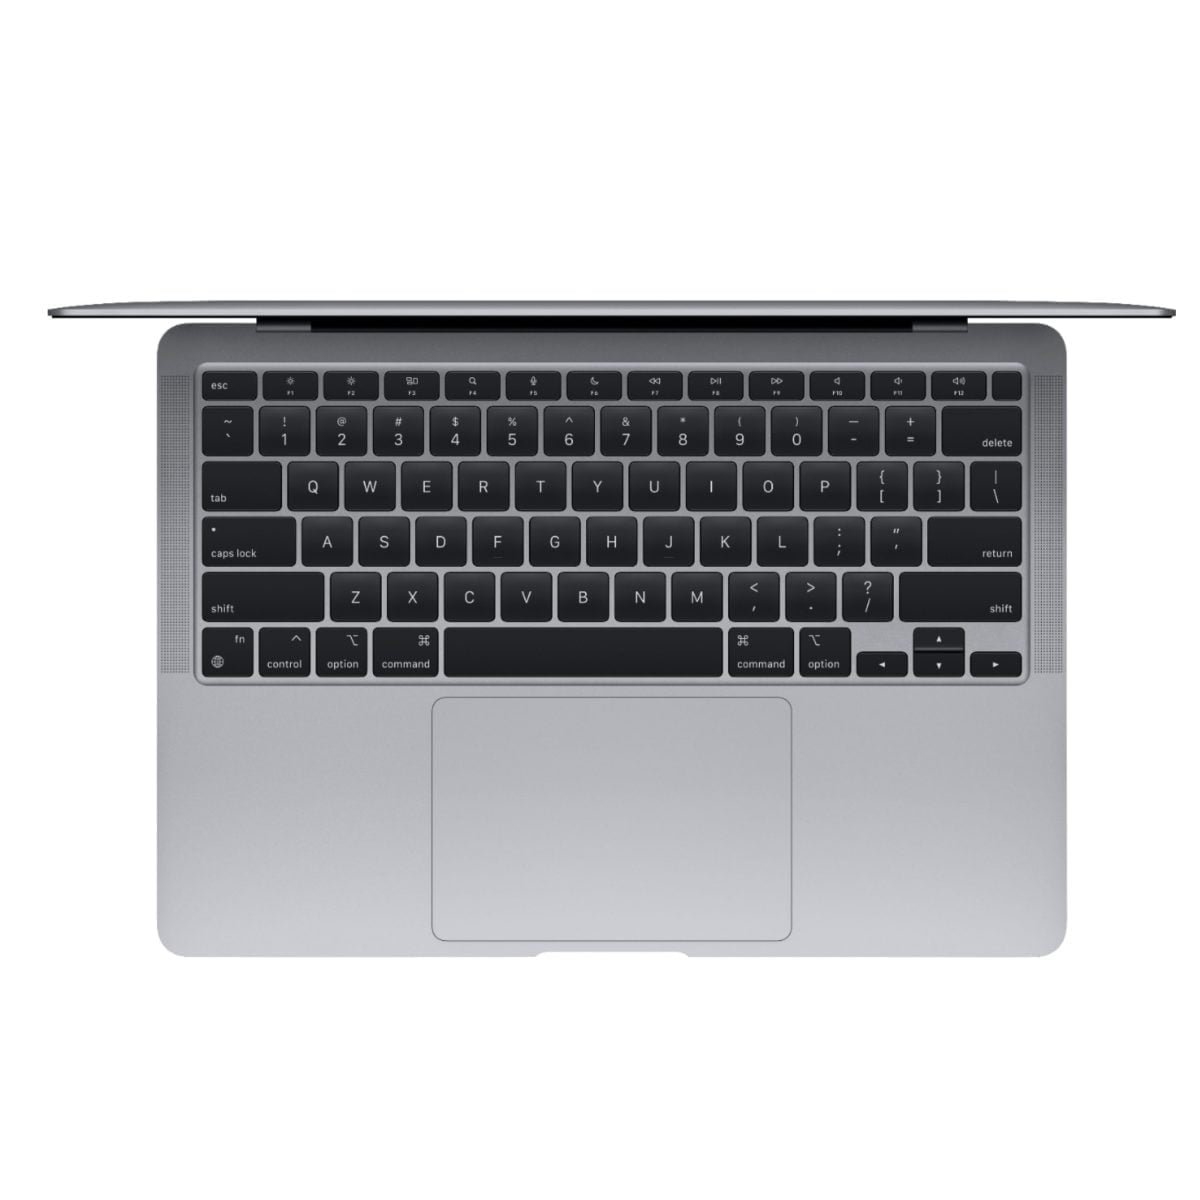 5721600Cv11D Scaled Apple &Lt;H1 Class=&Quot;Heading-5 V-Fw-Regular&Quot;&Gt;Macbook Air 13&Quot; Laptop - Apple M1 Chip - 8Gb Memory - 256Gb Ssd (Latest Model) - Space Gray (English Keyboard)&Lt;/H1&Gt; Https://Www.youtube.com/Watch?V=Hs1Hols4Sd0 Apple’s Thinnest And Lightest Notebook Gets Supercharged With The Apple M1 Chip. Tackle Your Projects With The Blazing-Fast 8-Core Cpu. Take Graphics-Intensive Apps And Games To The Next Level With The 7-Core Gpu. And Accelerate Machine Learning Tasks With The 16-Core Neural Engine. All With A Silent, Fanless Design And The Longest Battery Life Ever — Up To 18 Hours. Macbook Air. Still Perfectly Portable. Just A Lot More Powerful. Macbook Air 13 Macbook Air 13&Quot; Laptop - Apple M1 Chip - 8Gb Memory - 256Gb Ssd (Mgn63) - Space Gray